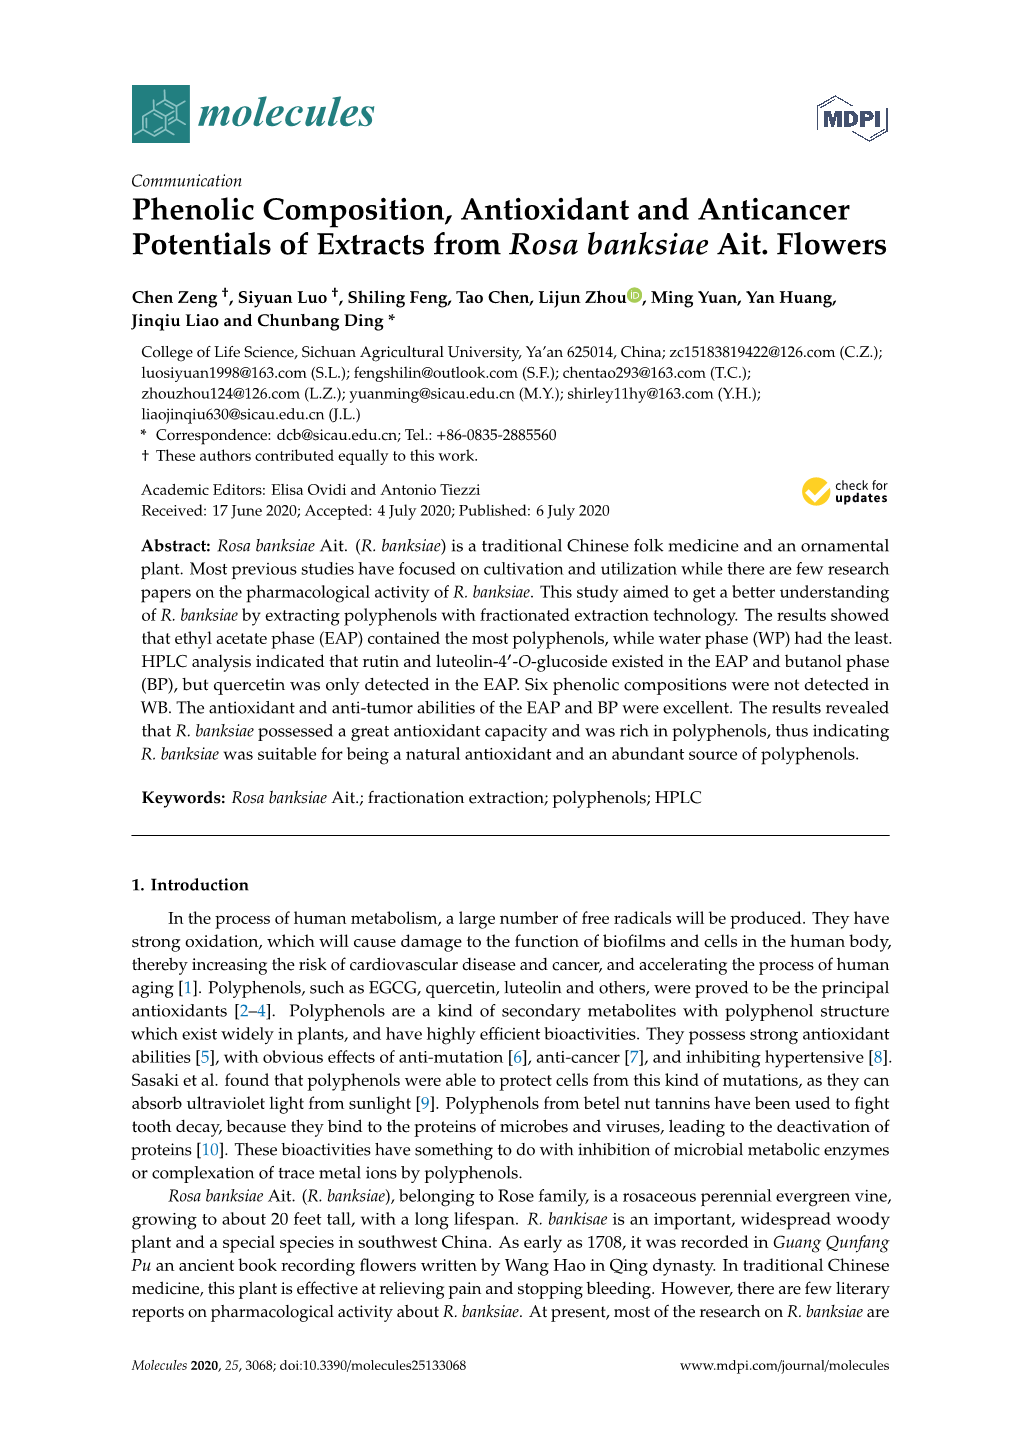 Phenolic Composition, Antioxidant and Anticancer Potentials of Extracts from Rosa Banksiae Ait